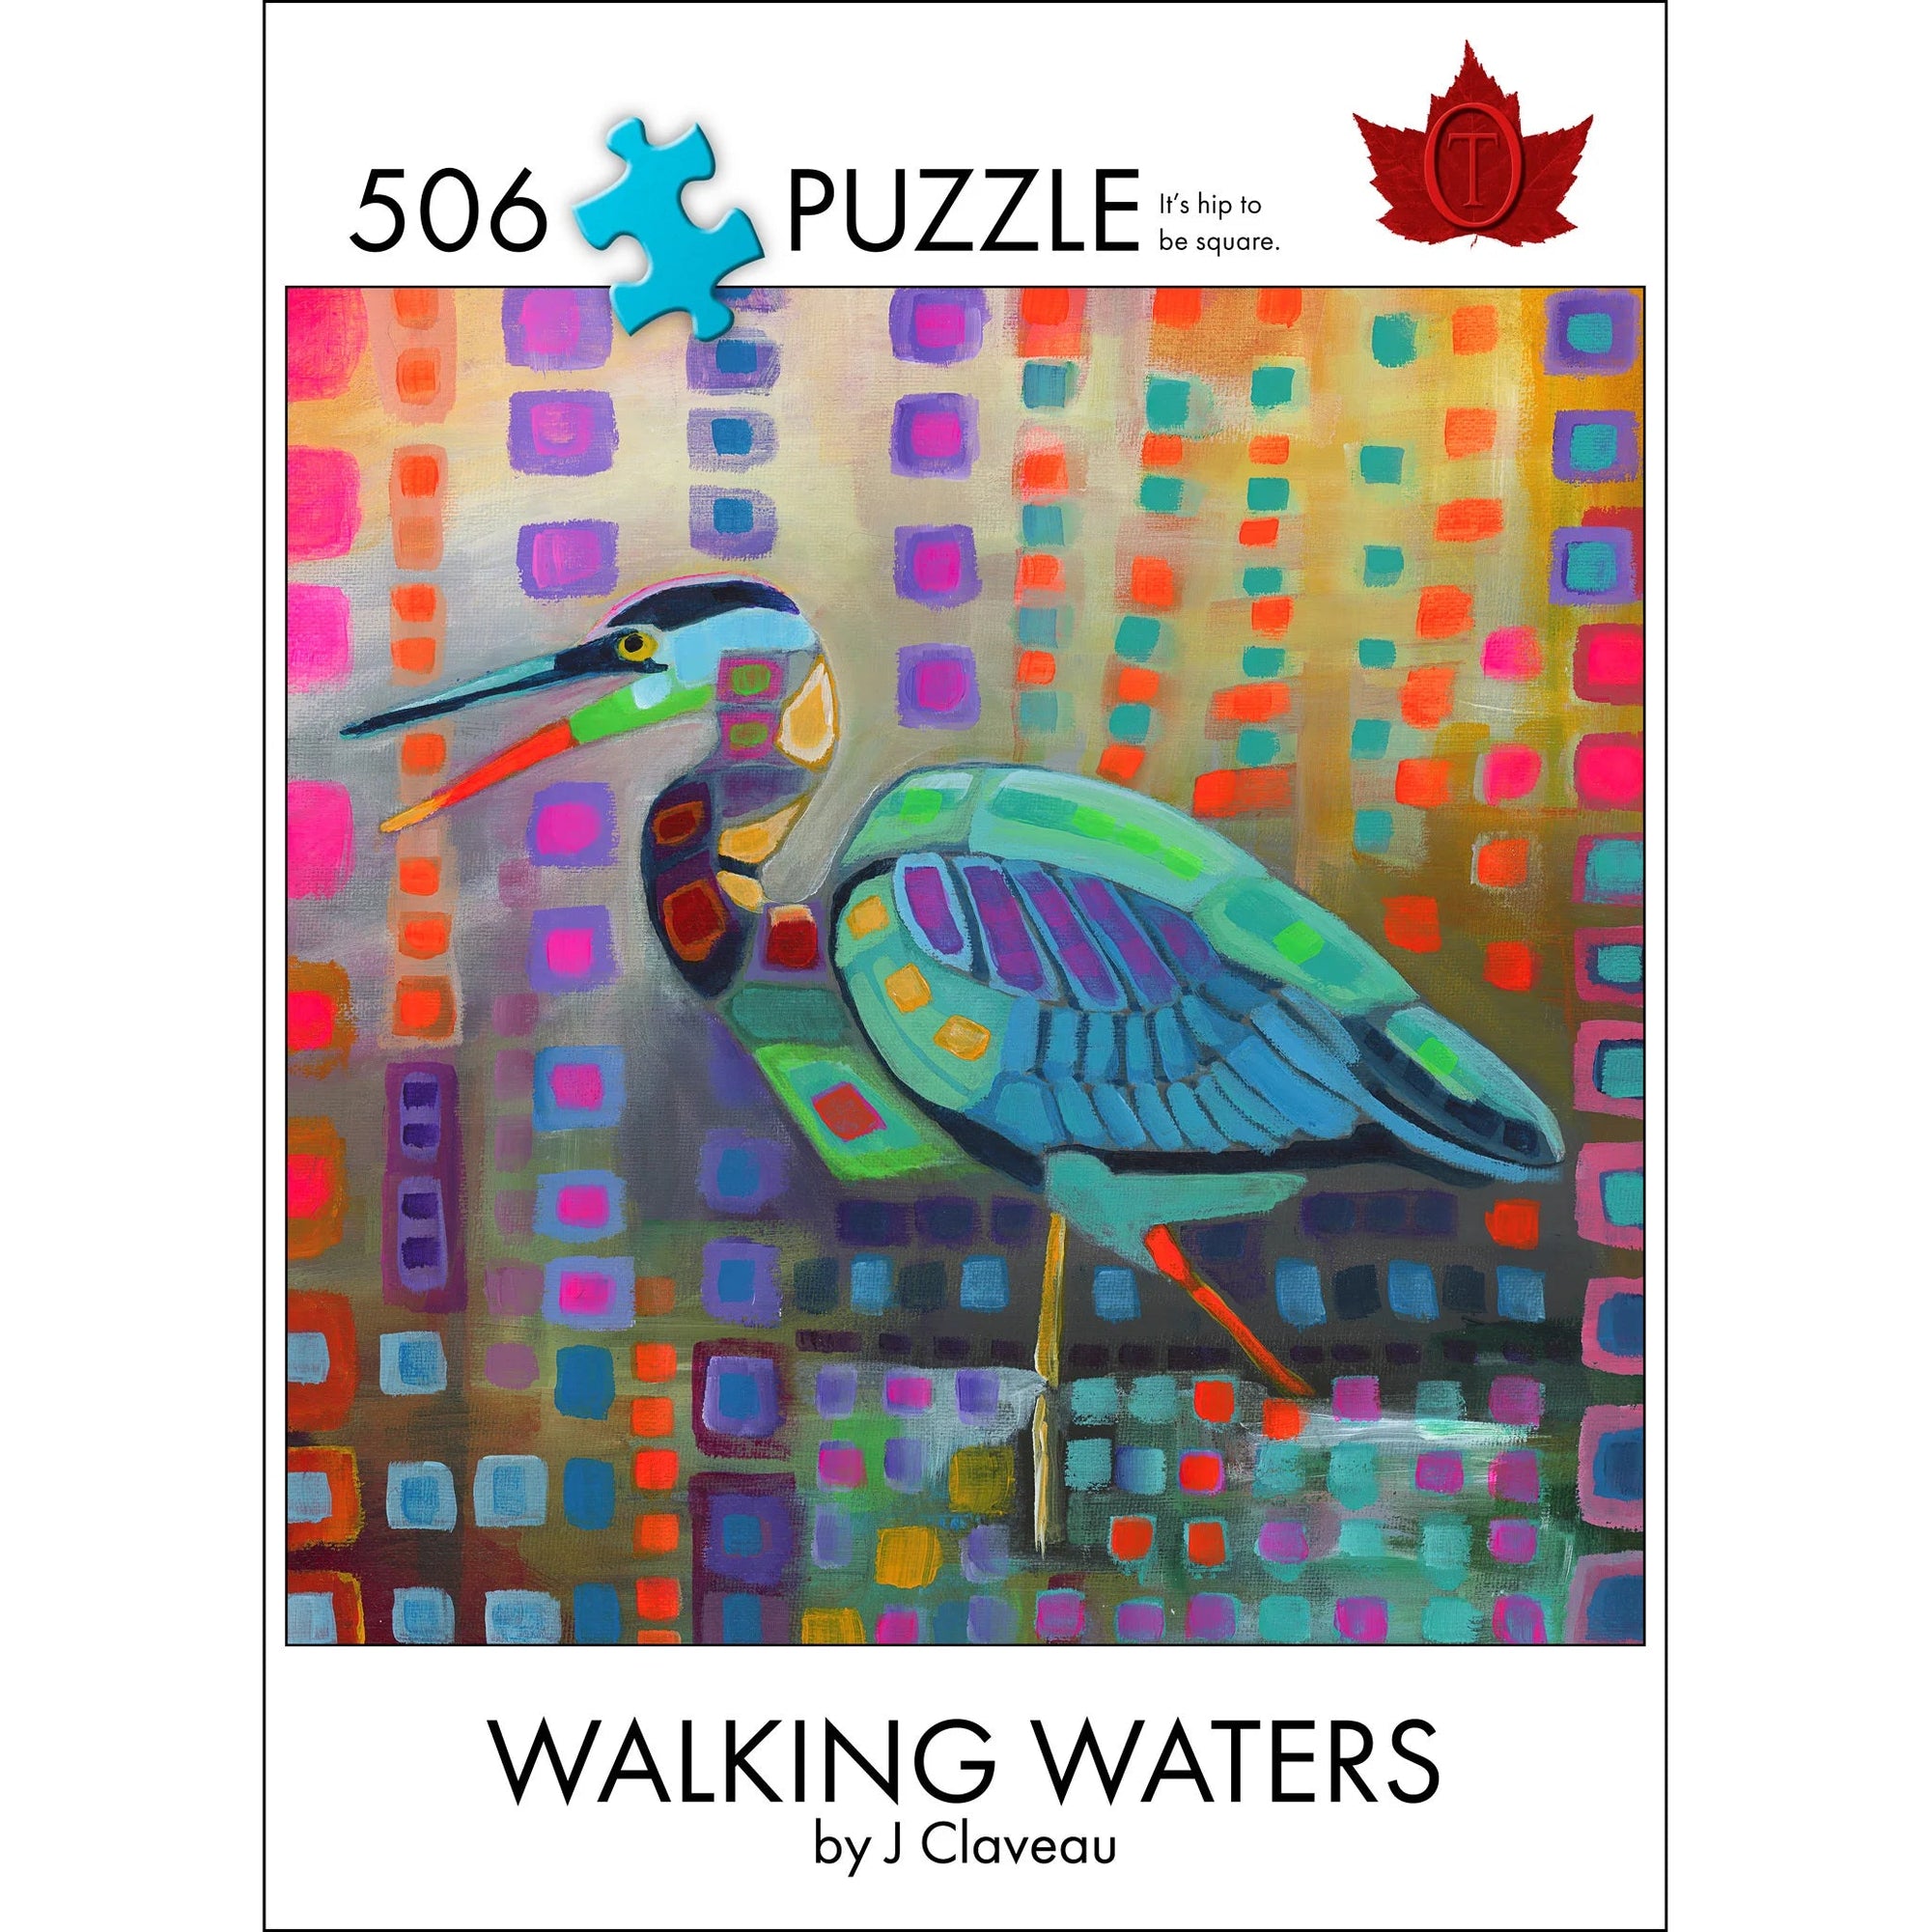 WALKING WATERS PUZZLE - 506 PIECES